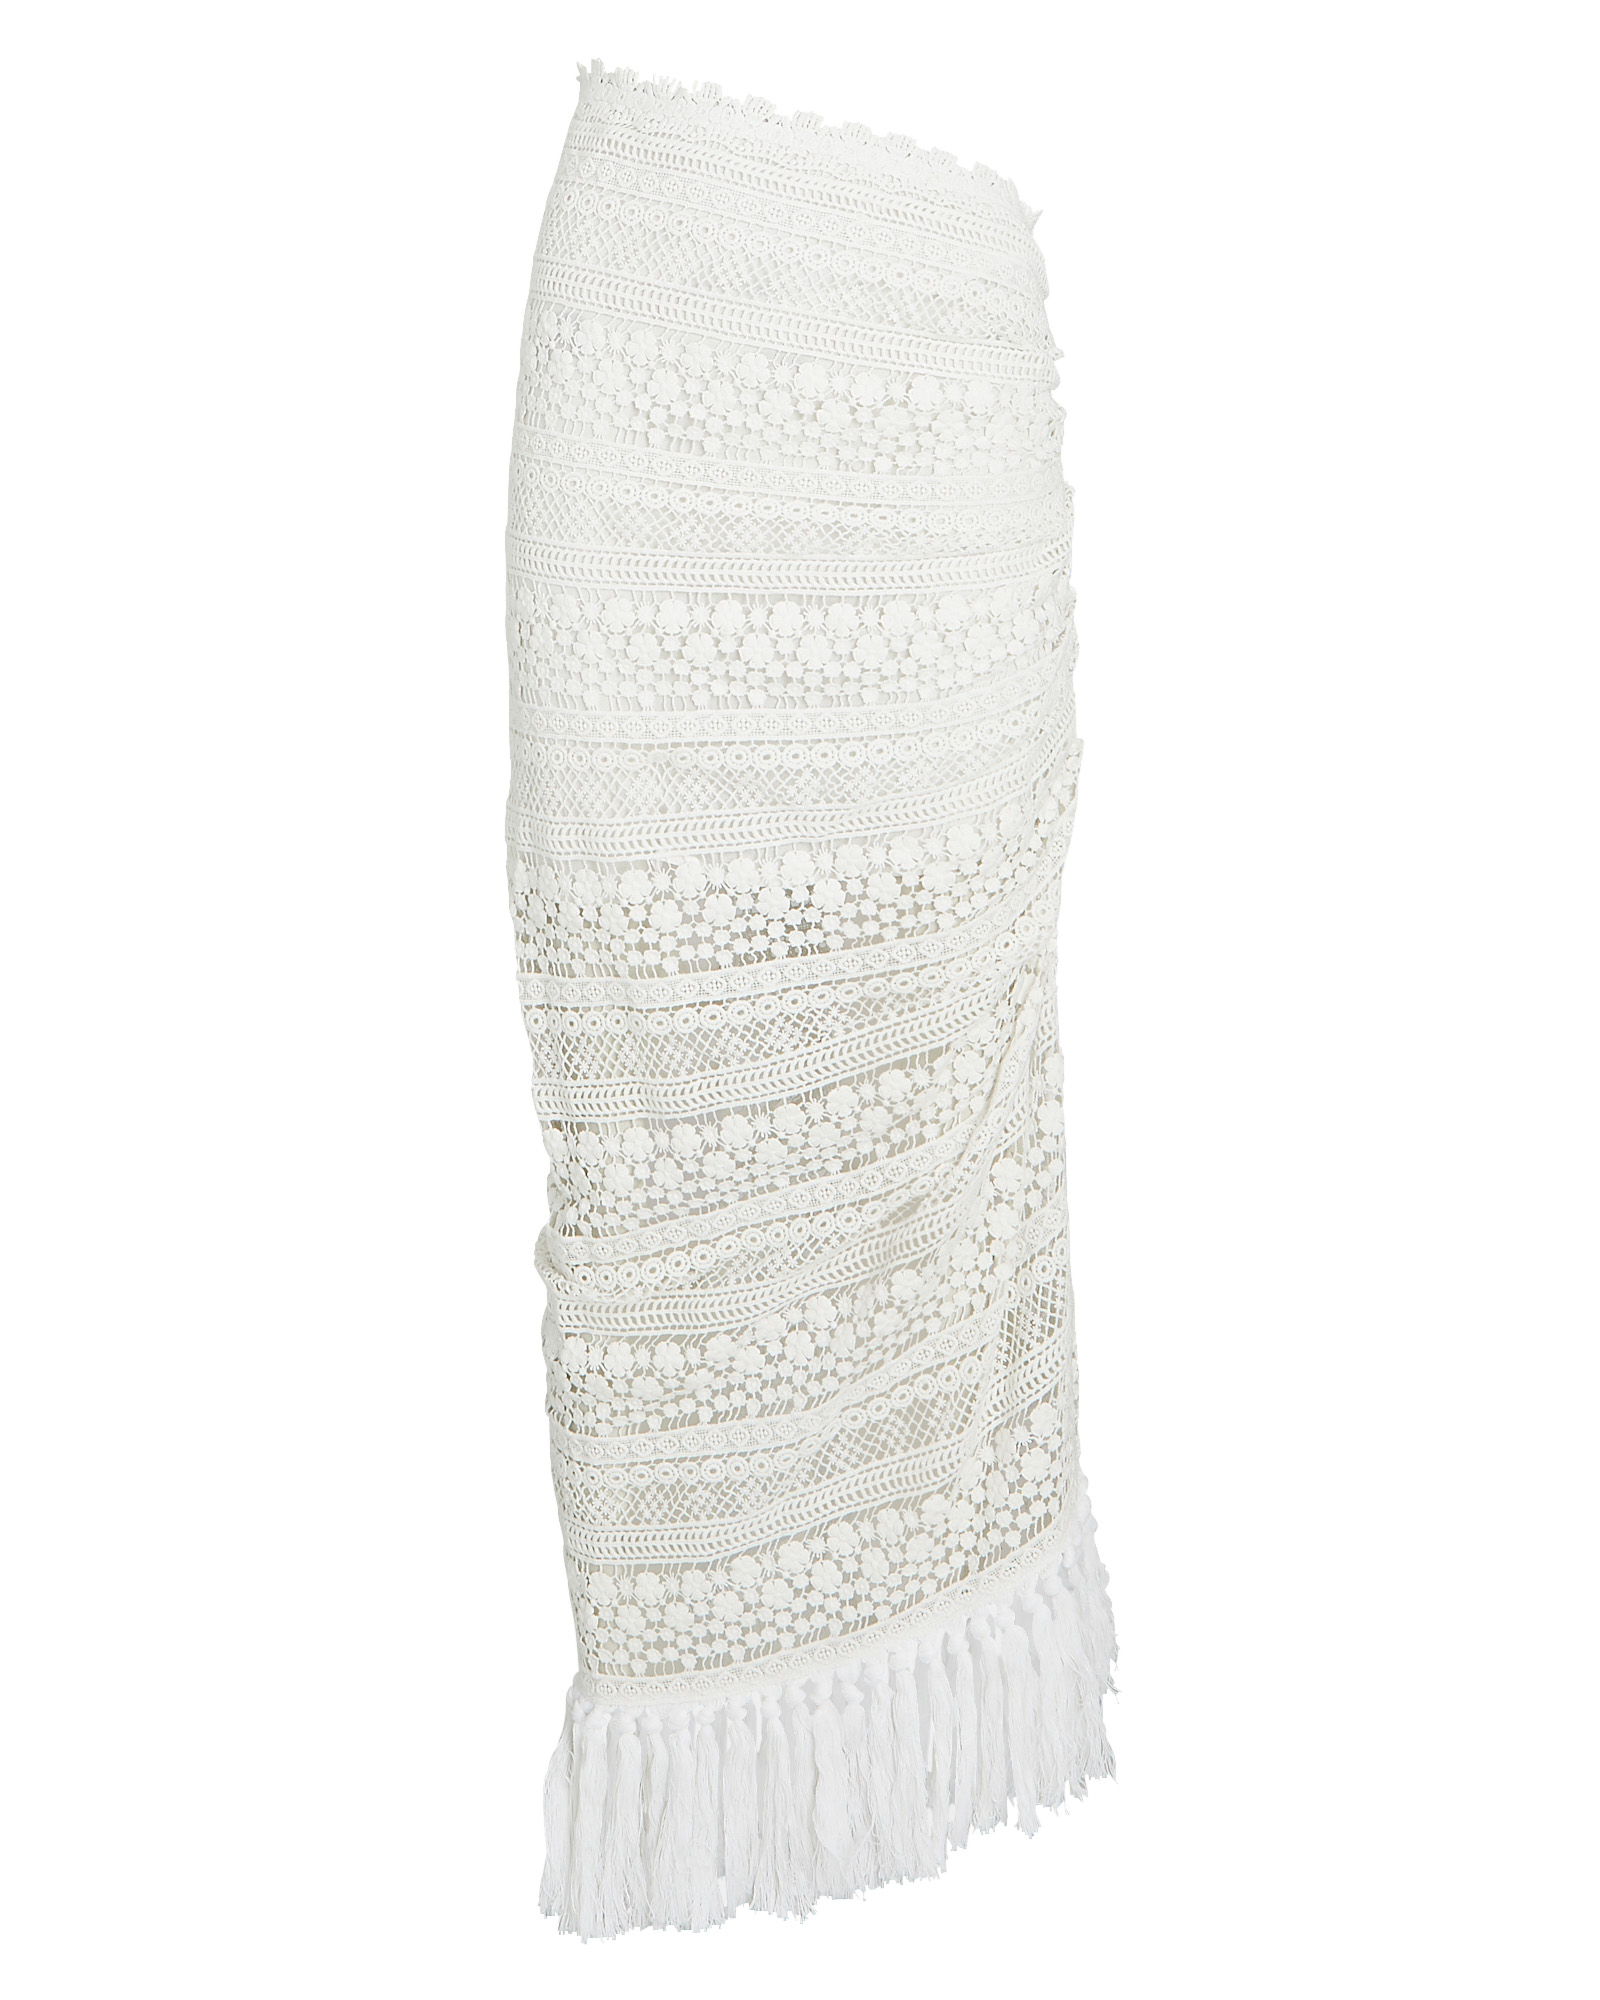 JUST BEE QUEEN Bali Crocheted Lace Maxi Skirt, White M | INTERMIX